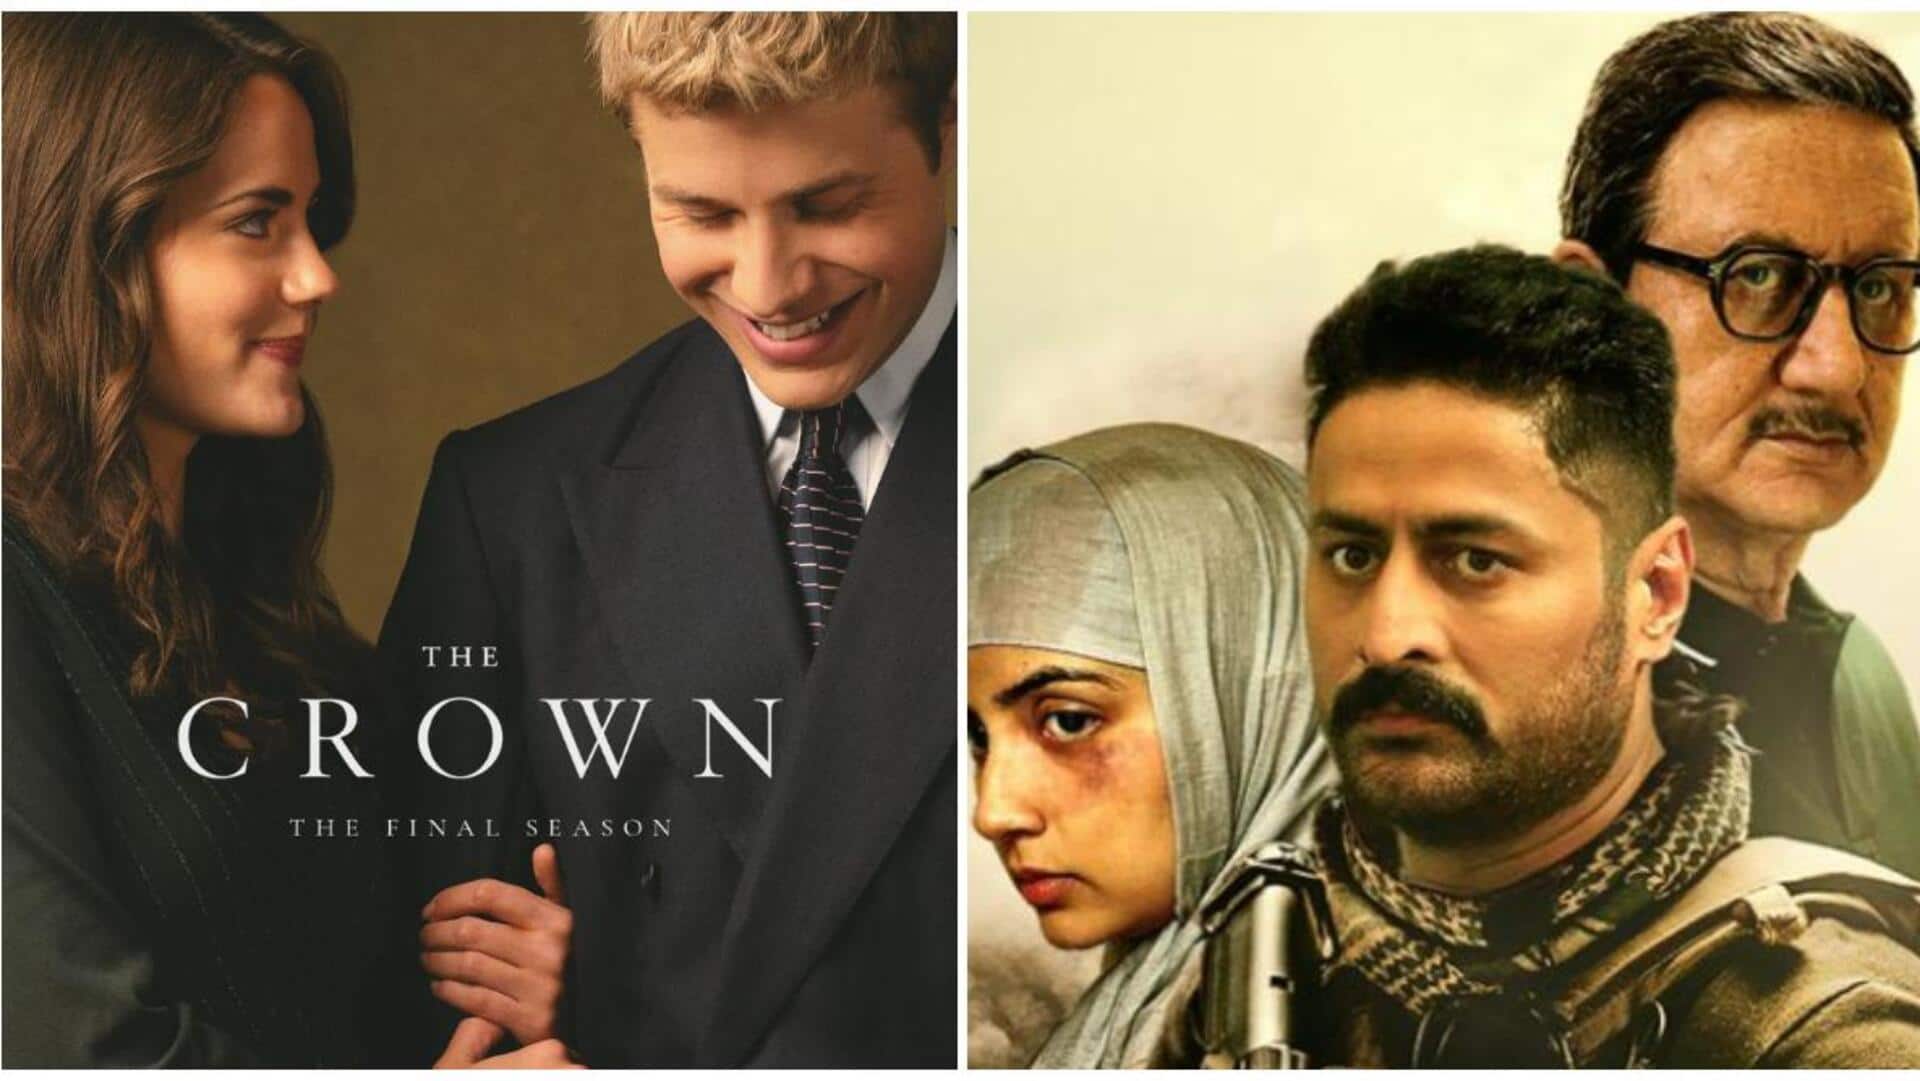 'The Crown' to 'Japan': OTT titles to watch this weekend